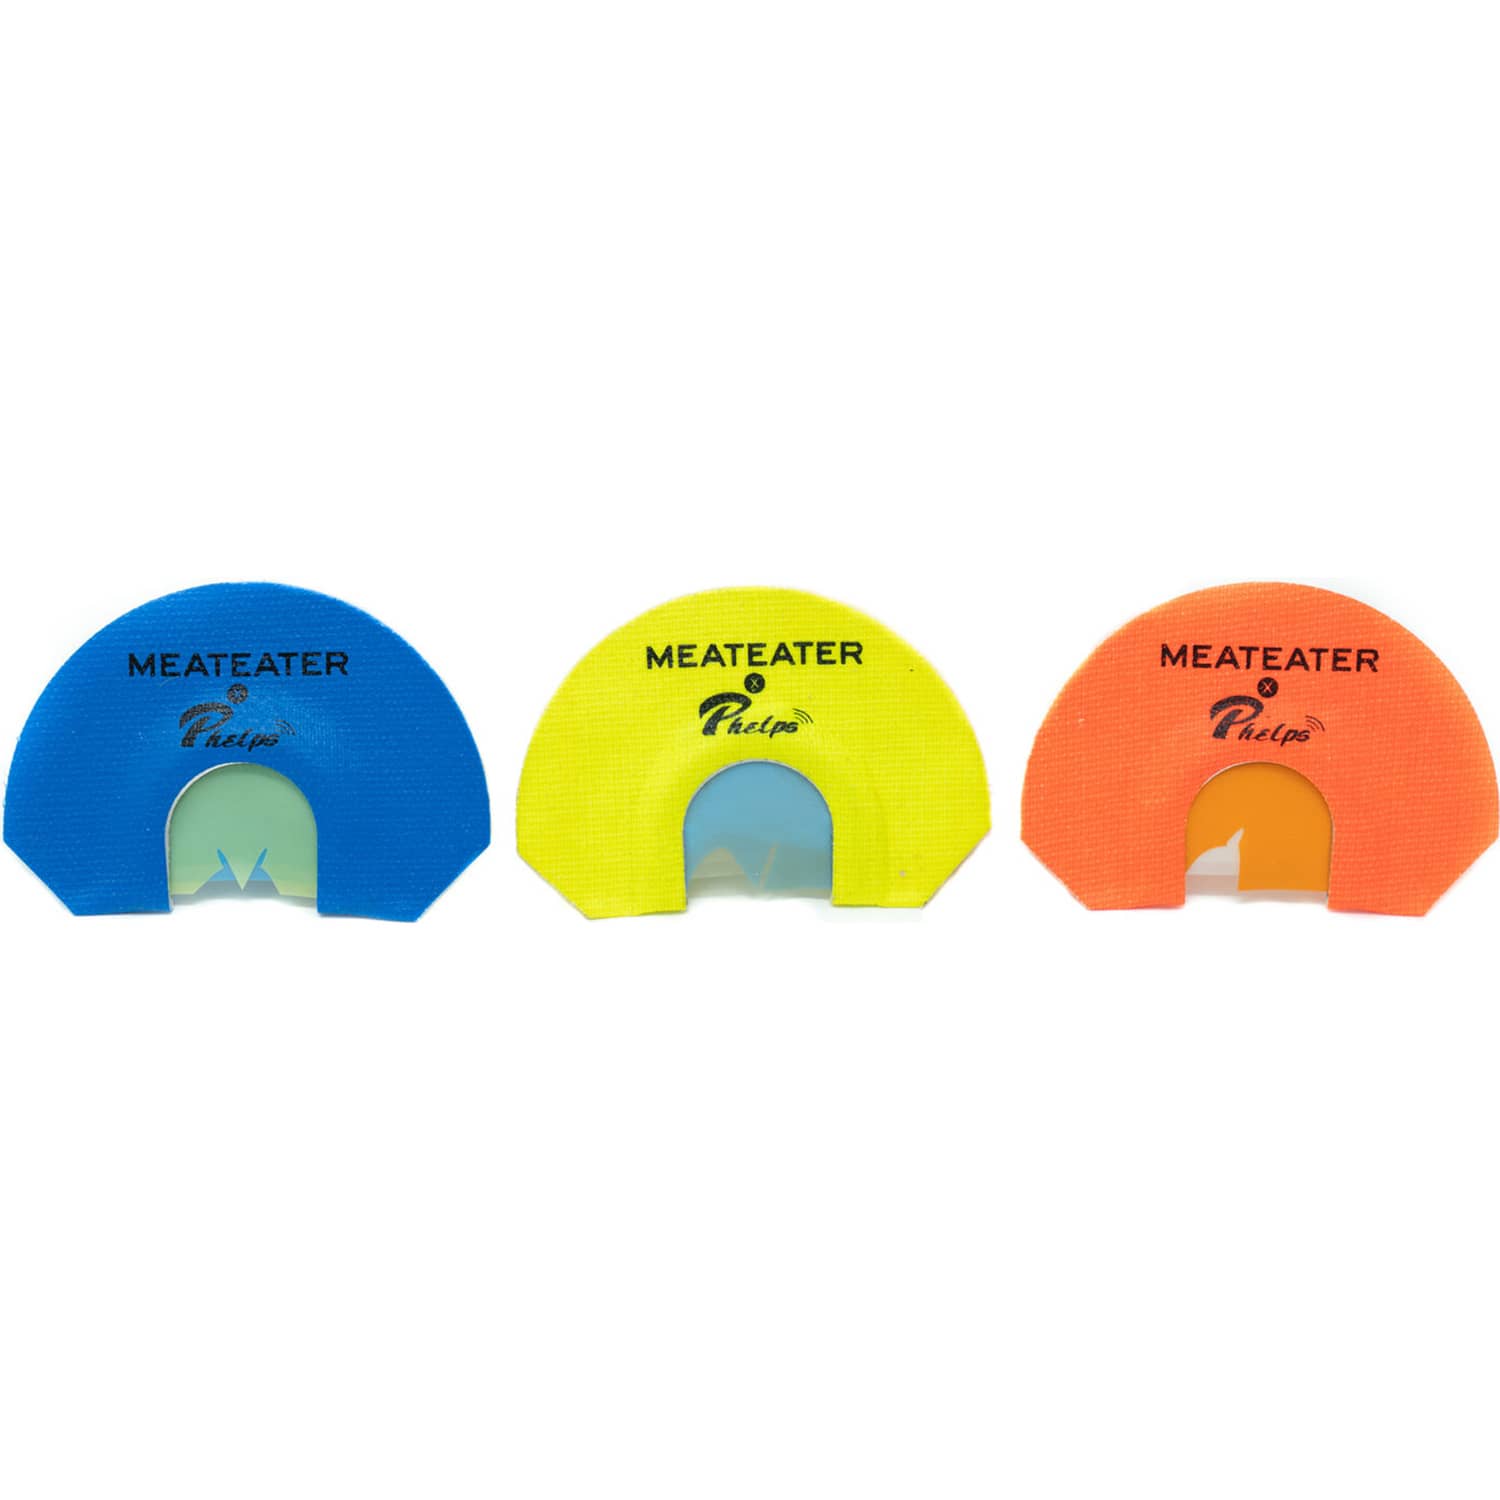 Phelps Meateater X Turkey Call 3-Pack Diaphragm